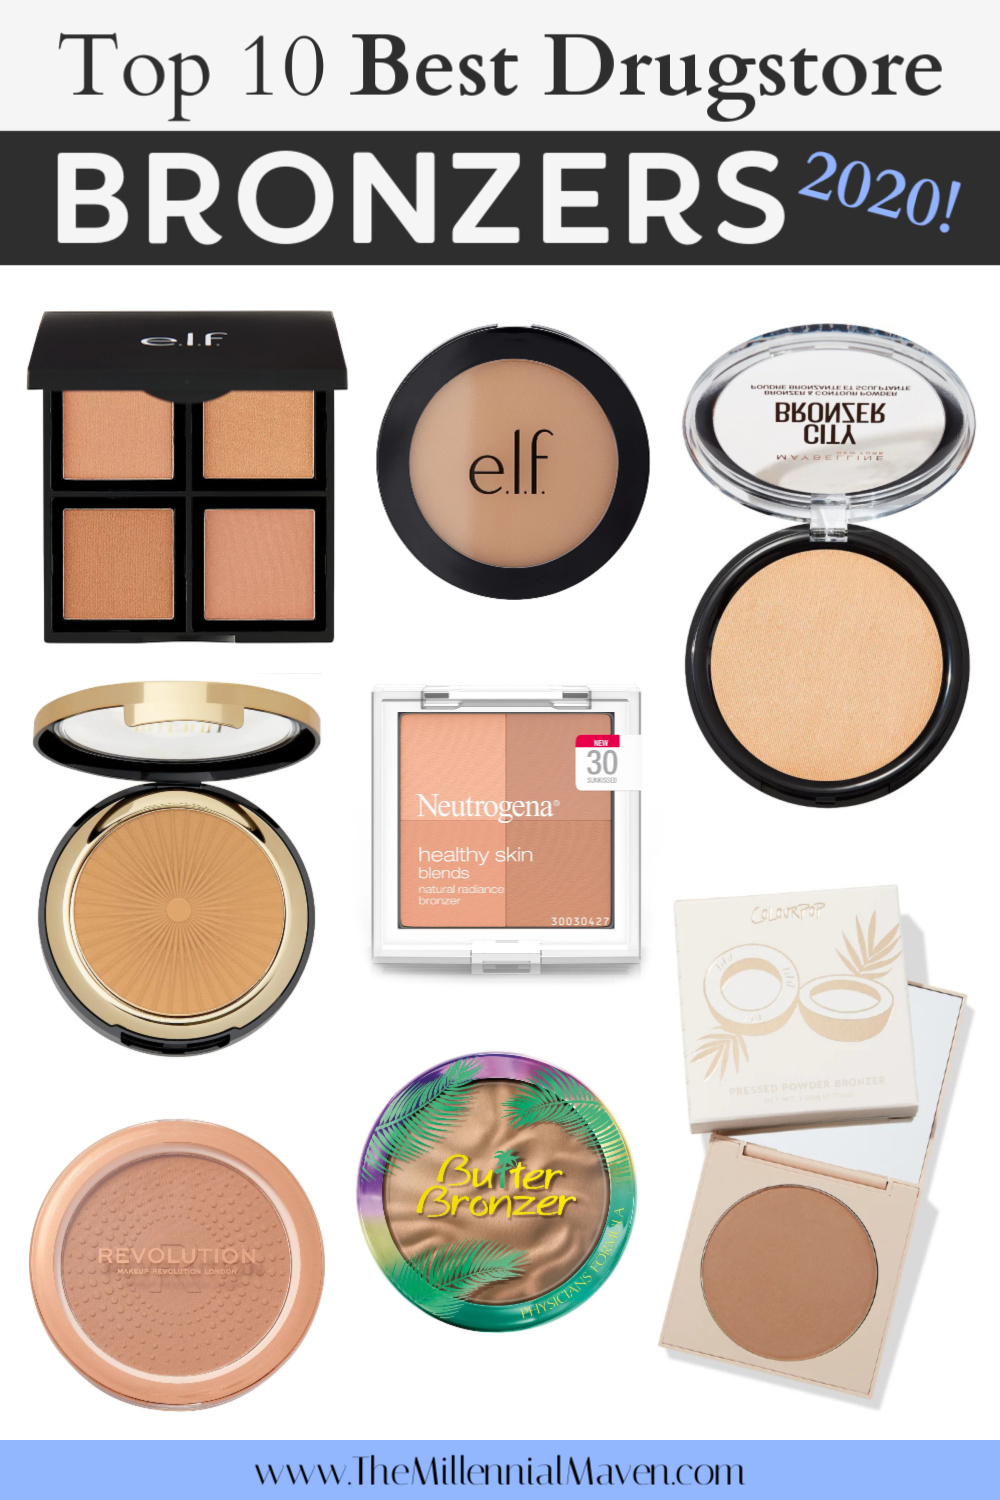 Top 10 Best Bronzers at the Drugstore in 2021 | Best Drugstore Bronzersers #drugstoremakeup